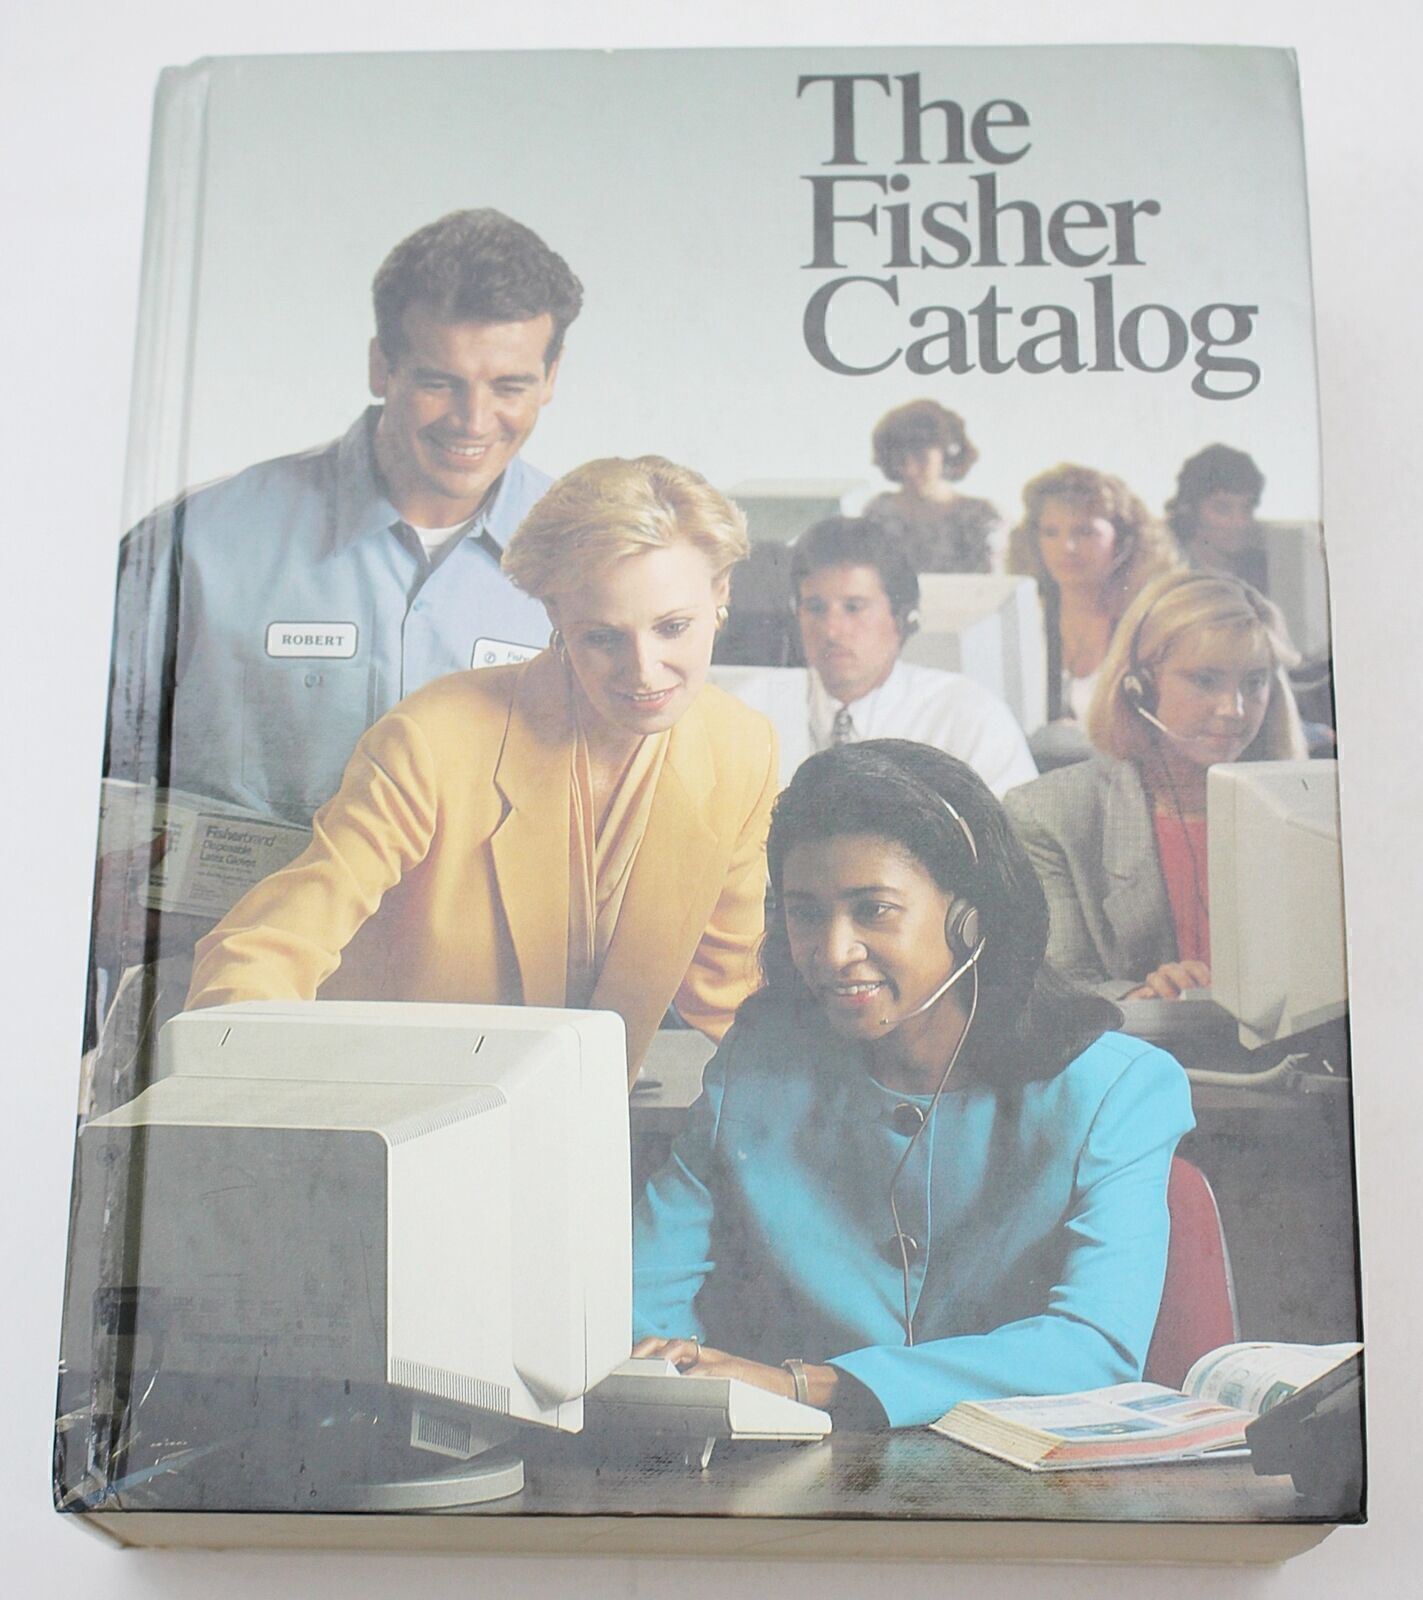 1993/1994 The Fisher Catalog Vintage Scientific Science Instruments, Supplies